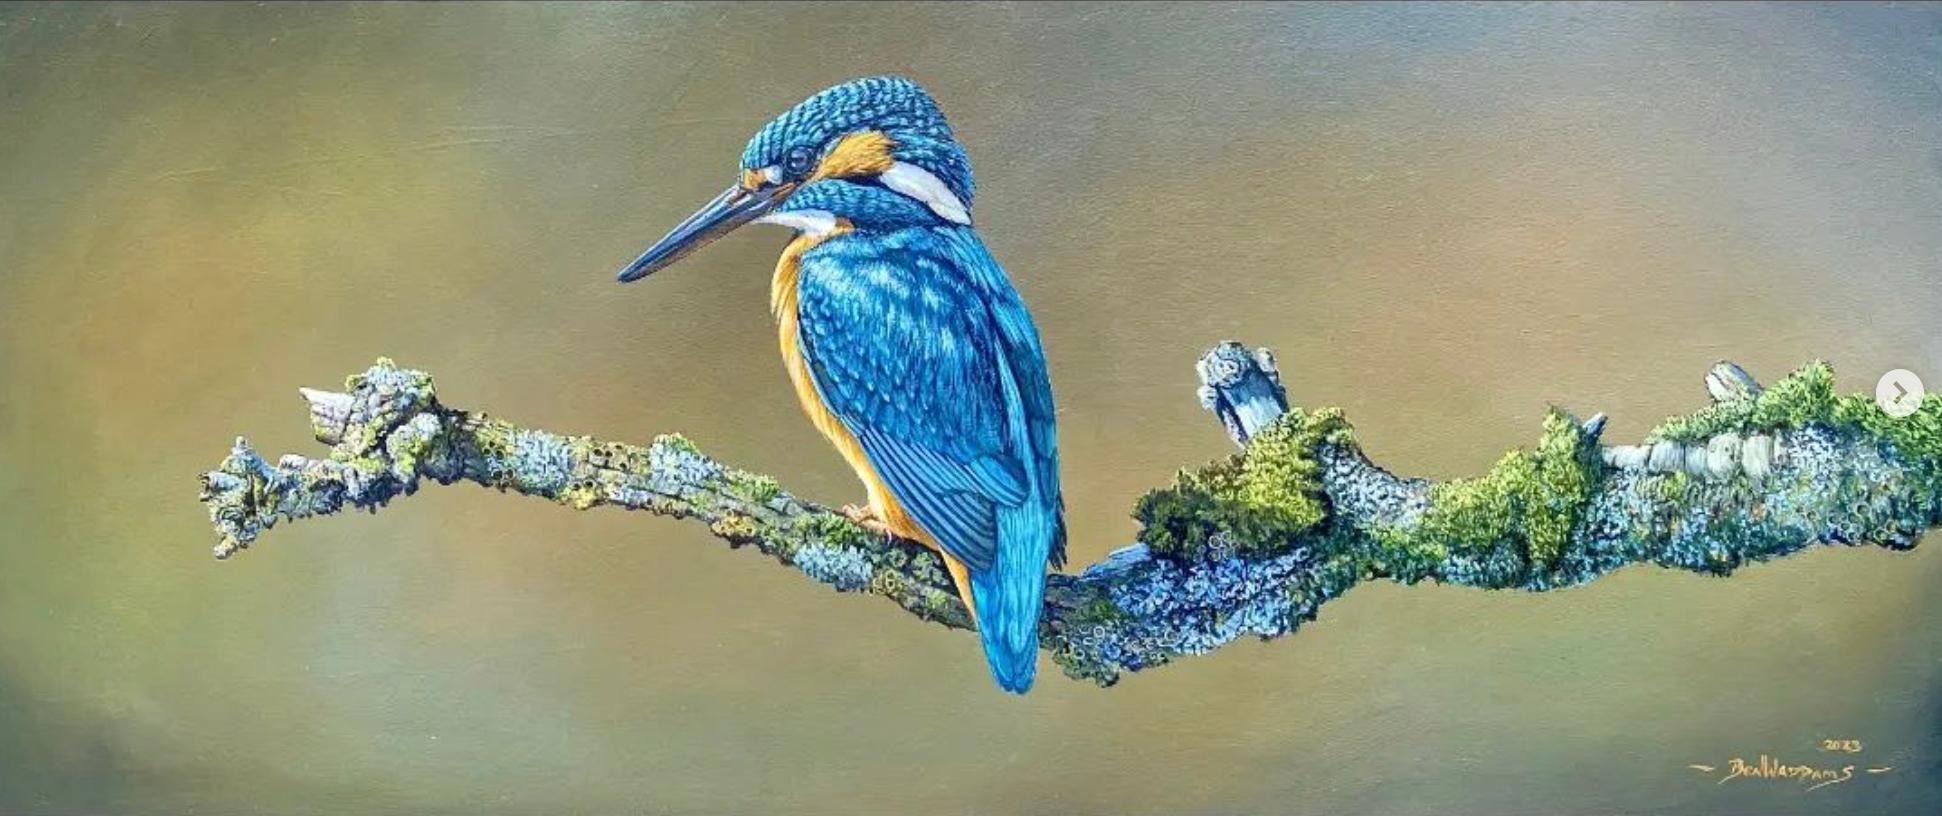 Ben Waddams Animal Painting - 'A Moment rest' Photorealist painting of a Kingfisher in the wild, blue, orange